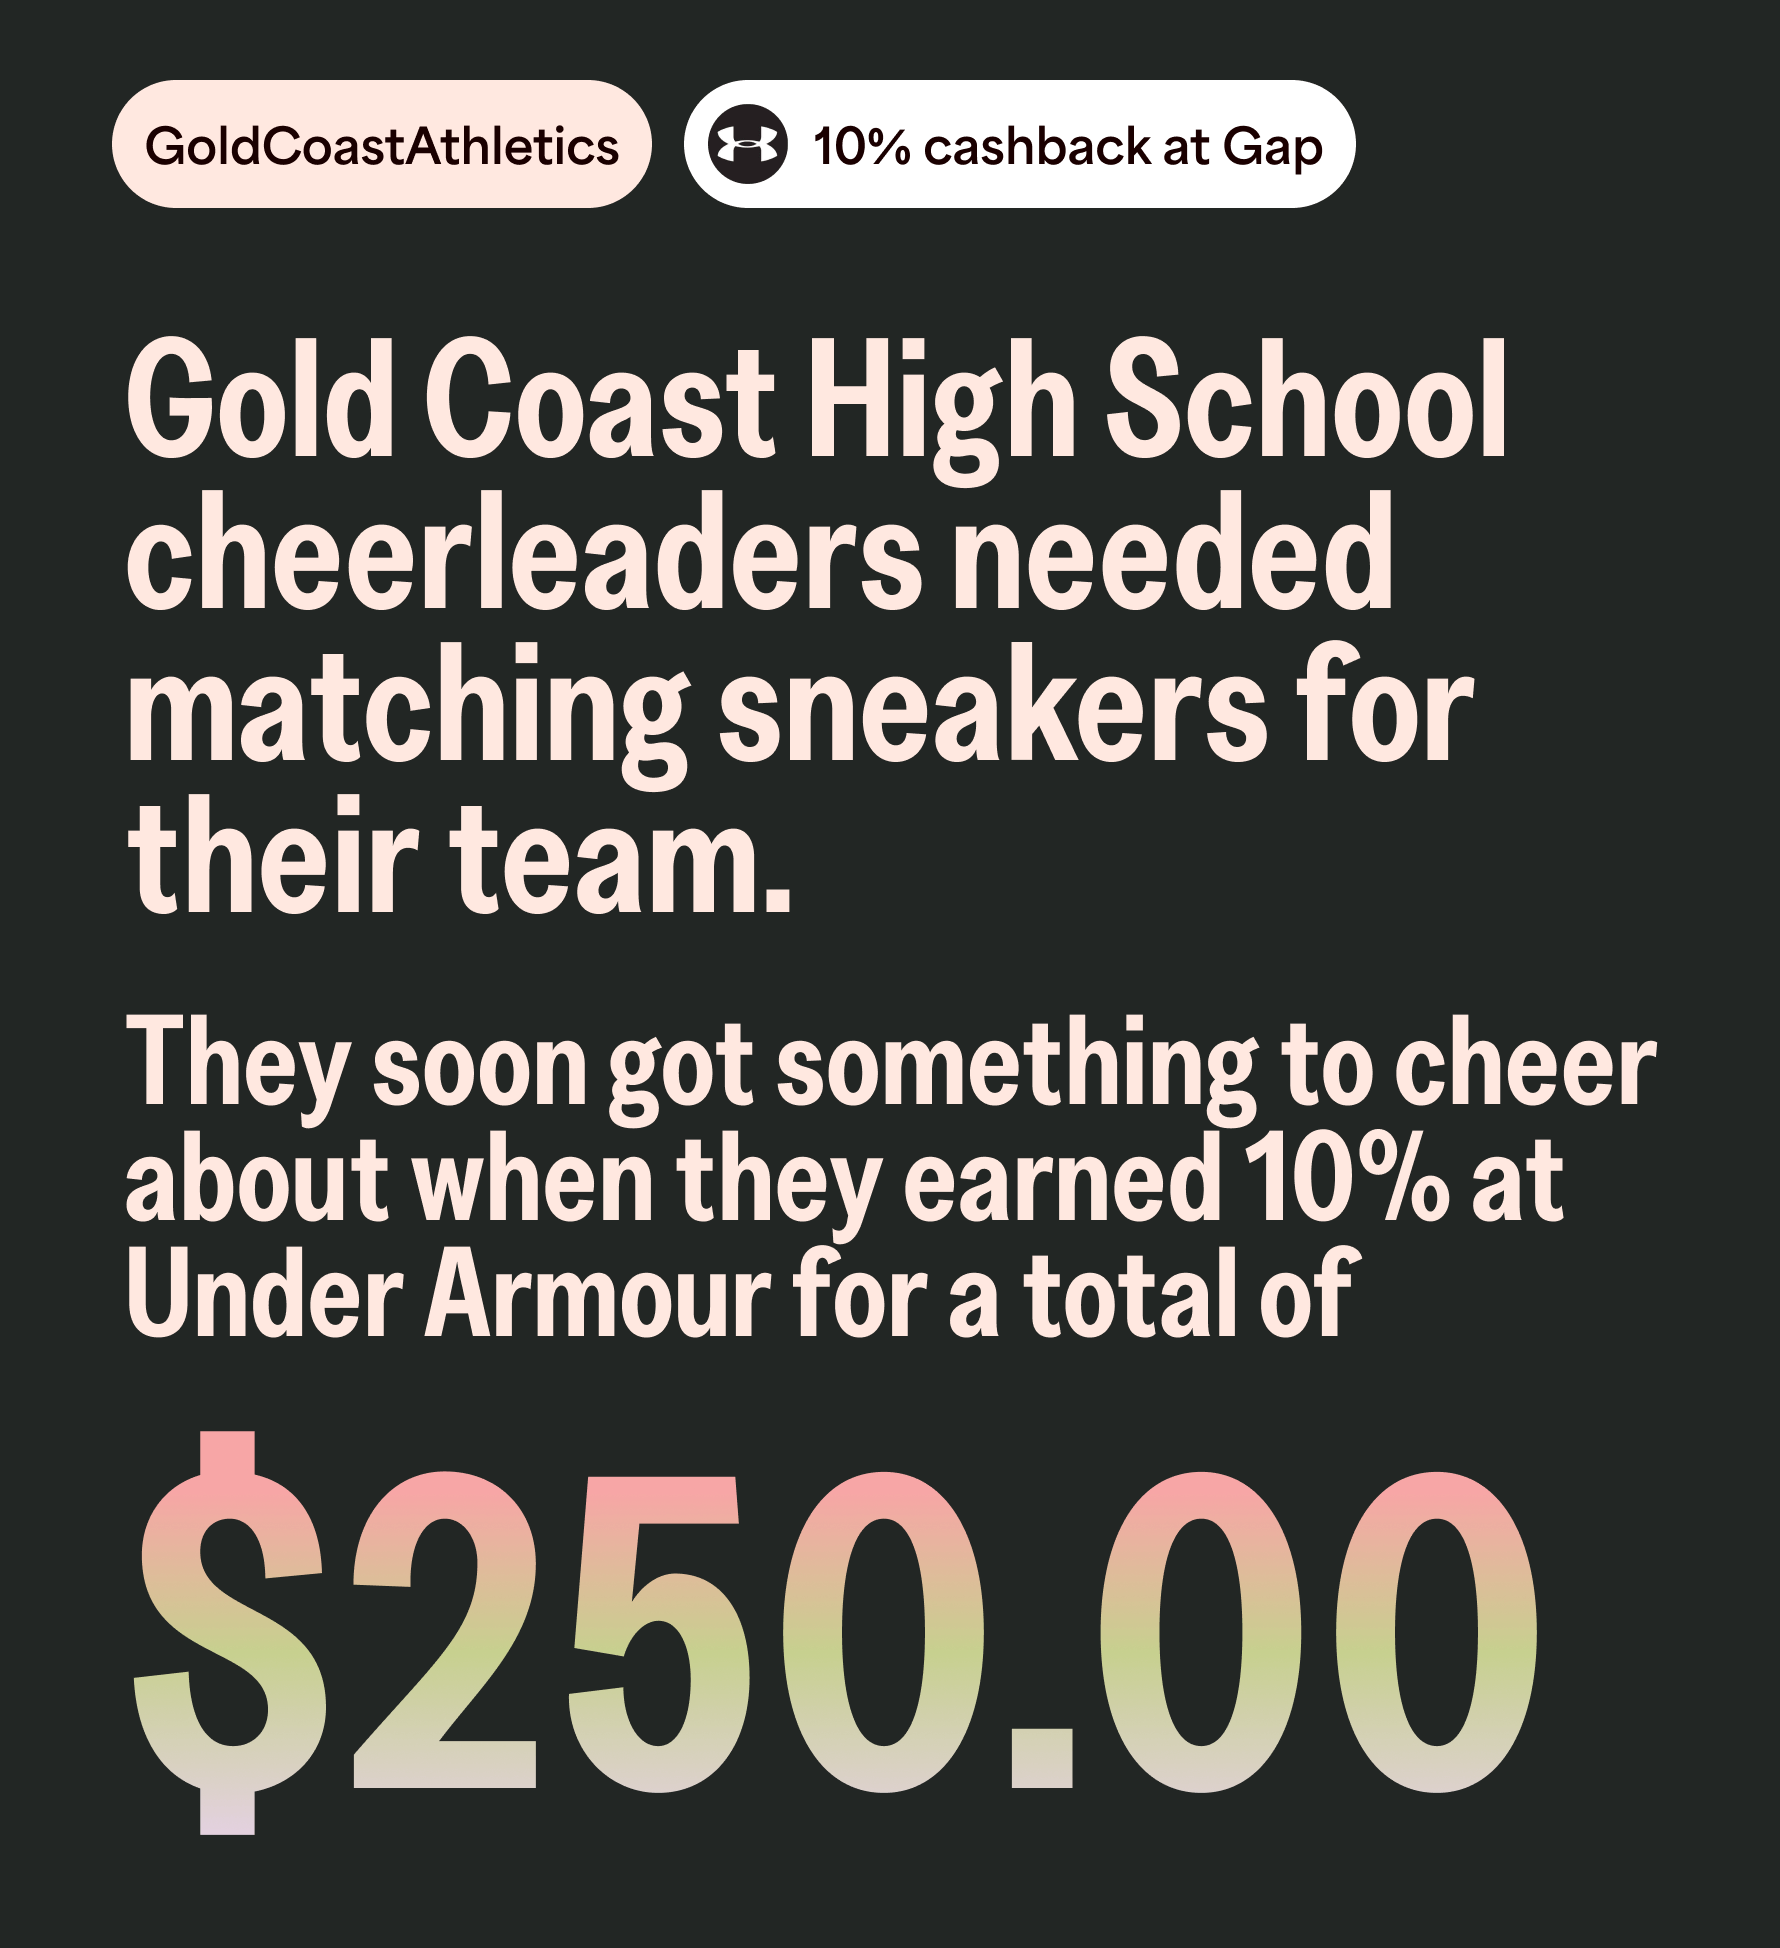 GoldCoastAthletics 10% cashback at Gap. Gold Coast High School cheerleaders needed matching sneakers for their team. They soon got something to cheer about when they earned 10% at Under Armour for a total of $250.00